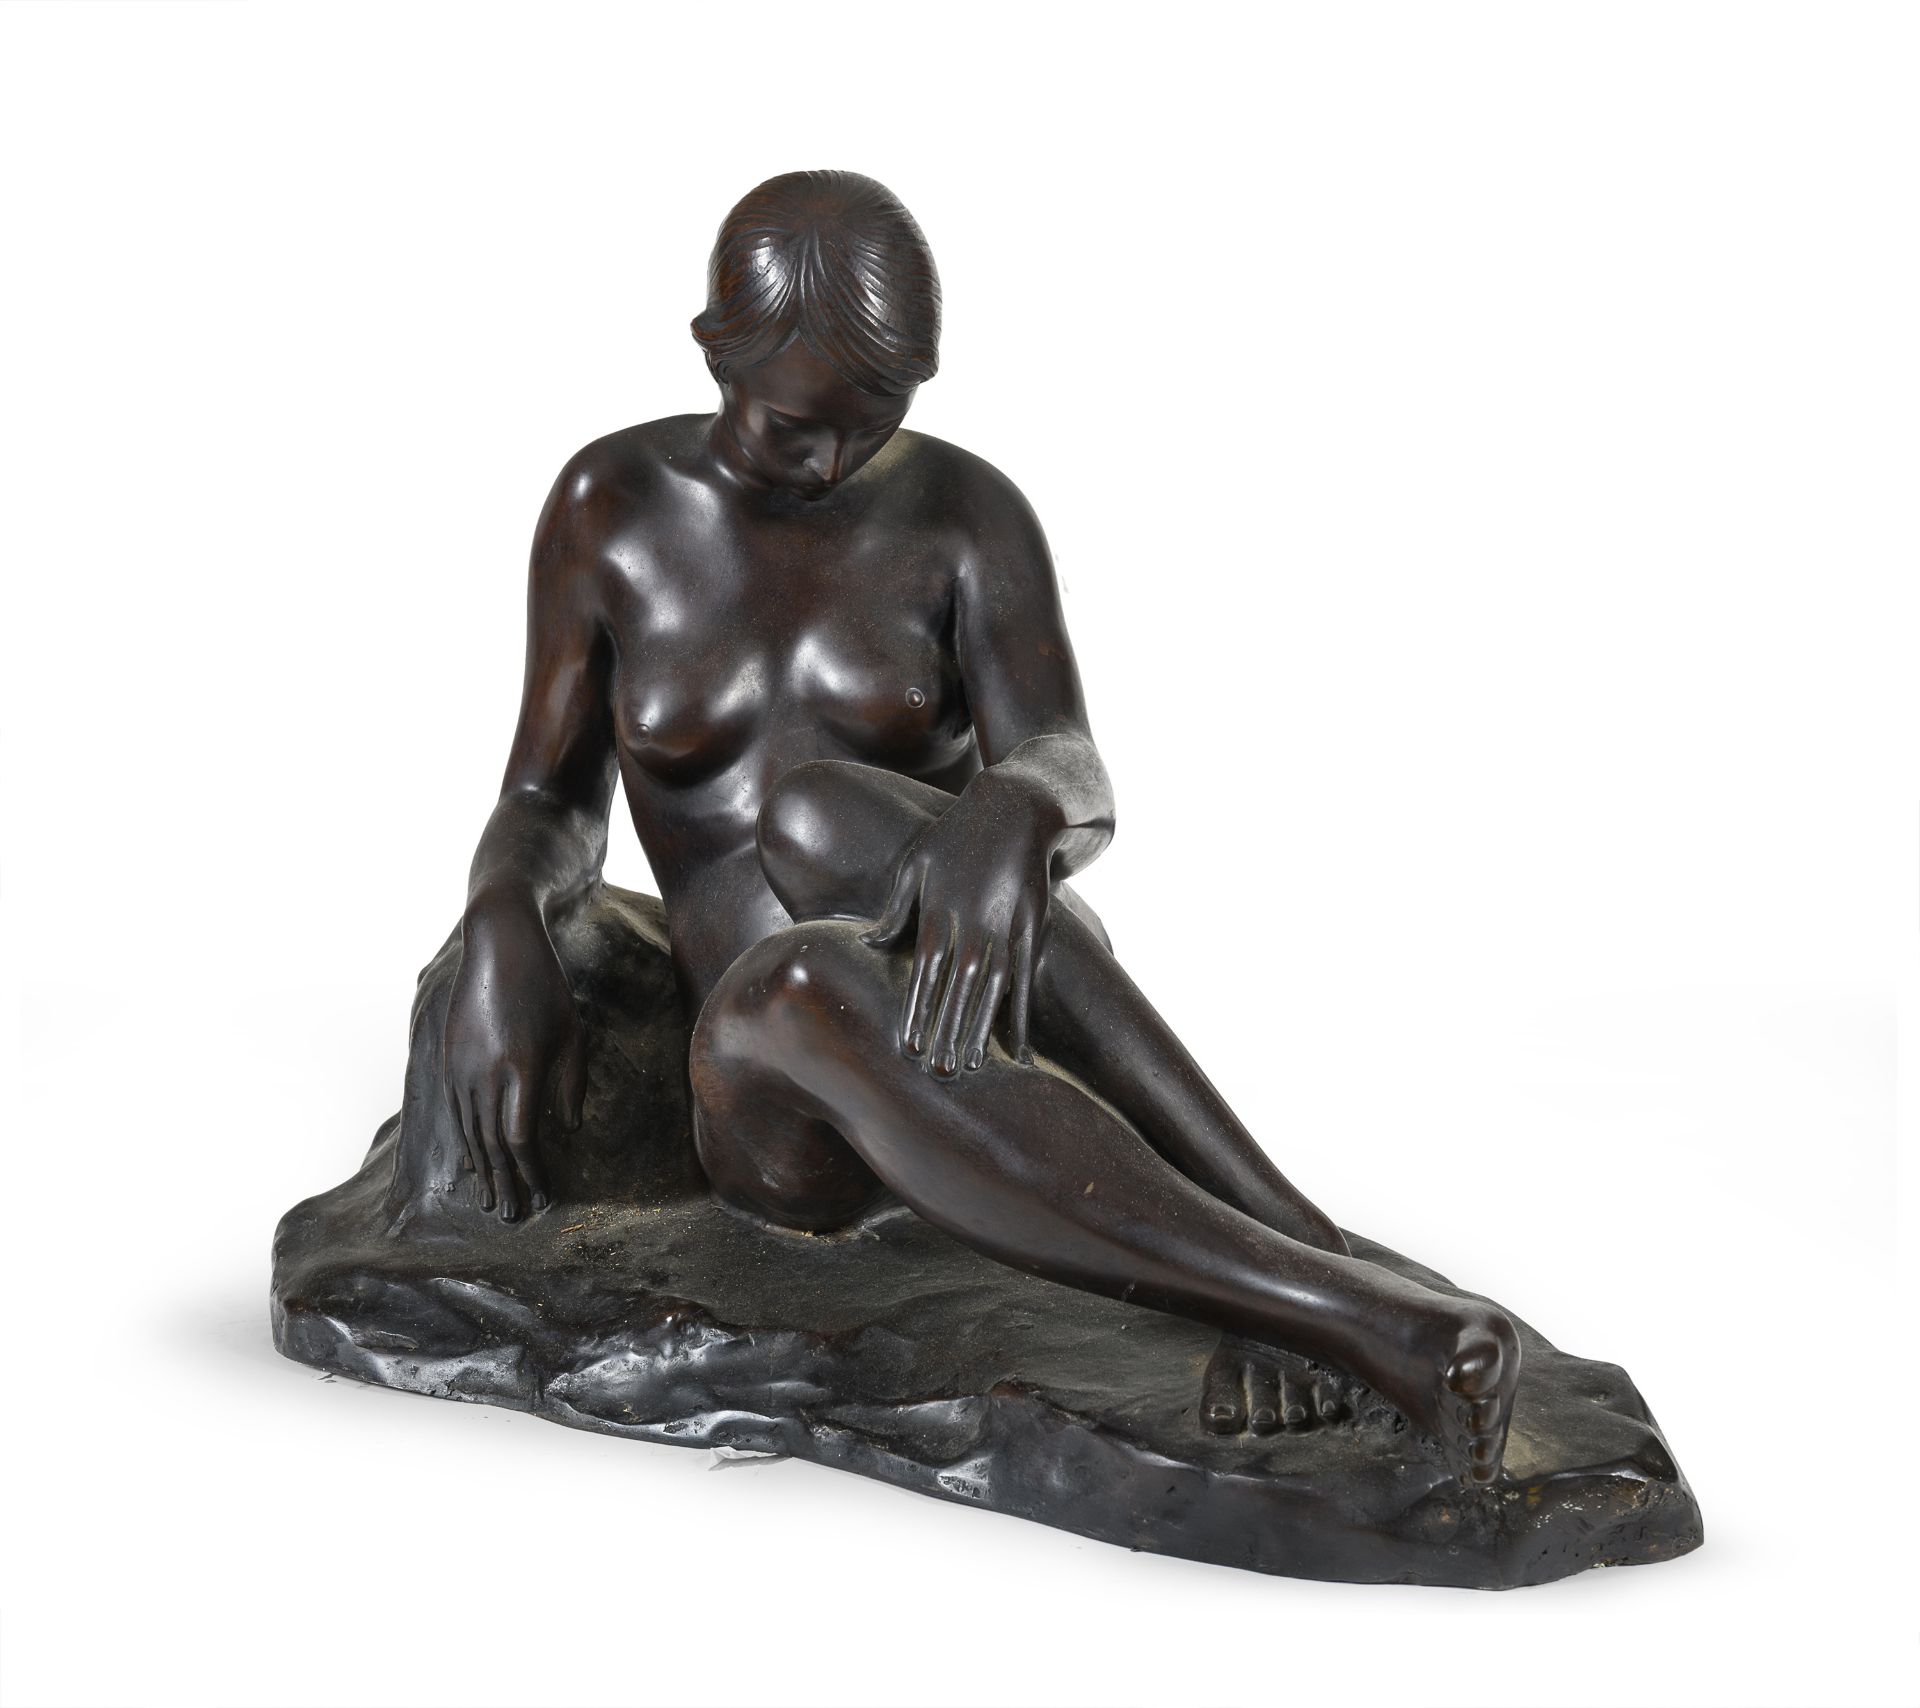 BRONZE NUDE SIGNED 'R. ADAM' EARLY 20TH CENTURY - Image 2 of 2